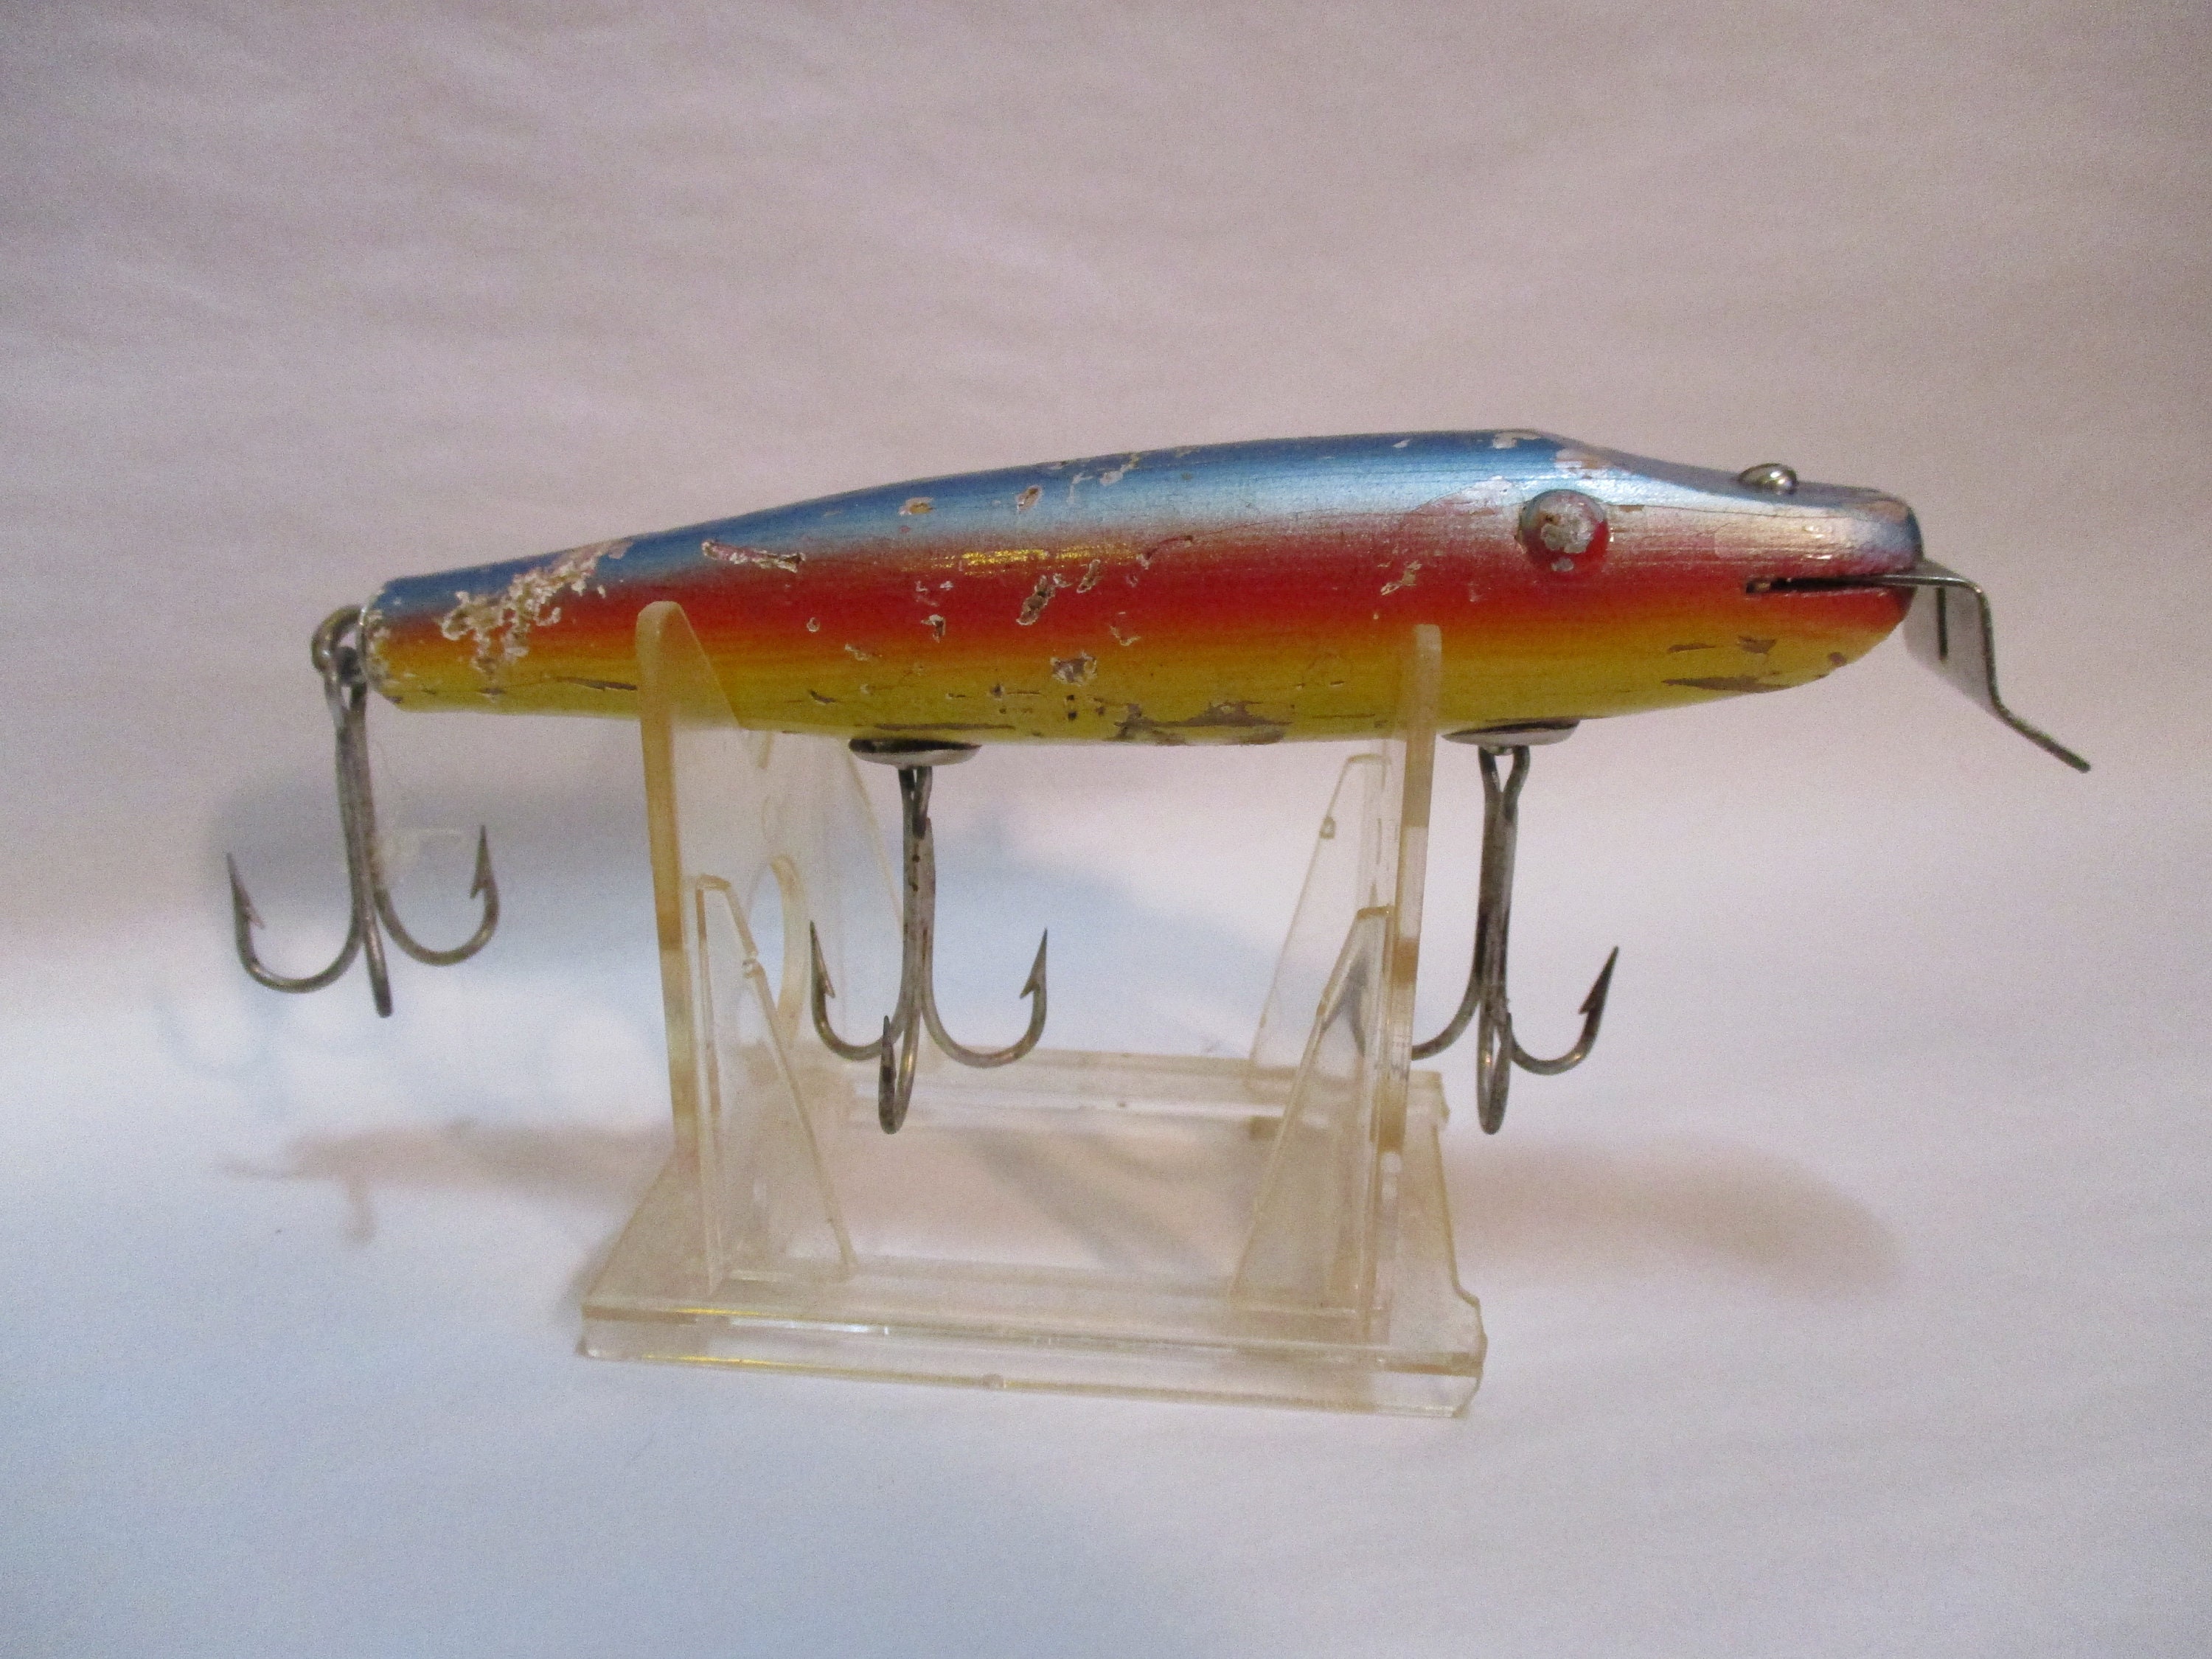 Vintage Wooden Fishing Lure, 4 1/4 Inch, Chub Pikie, Used